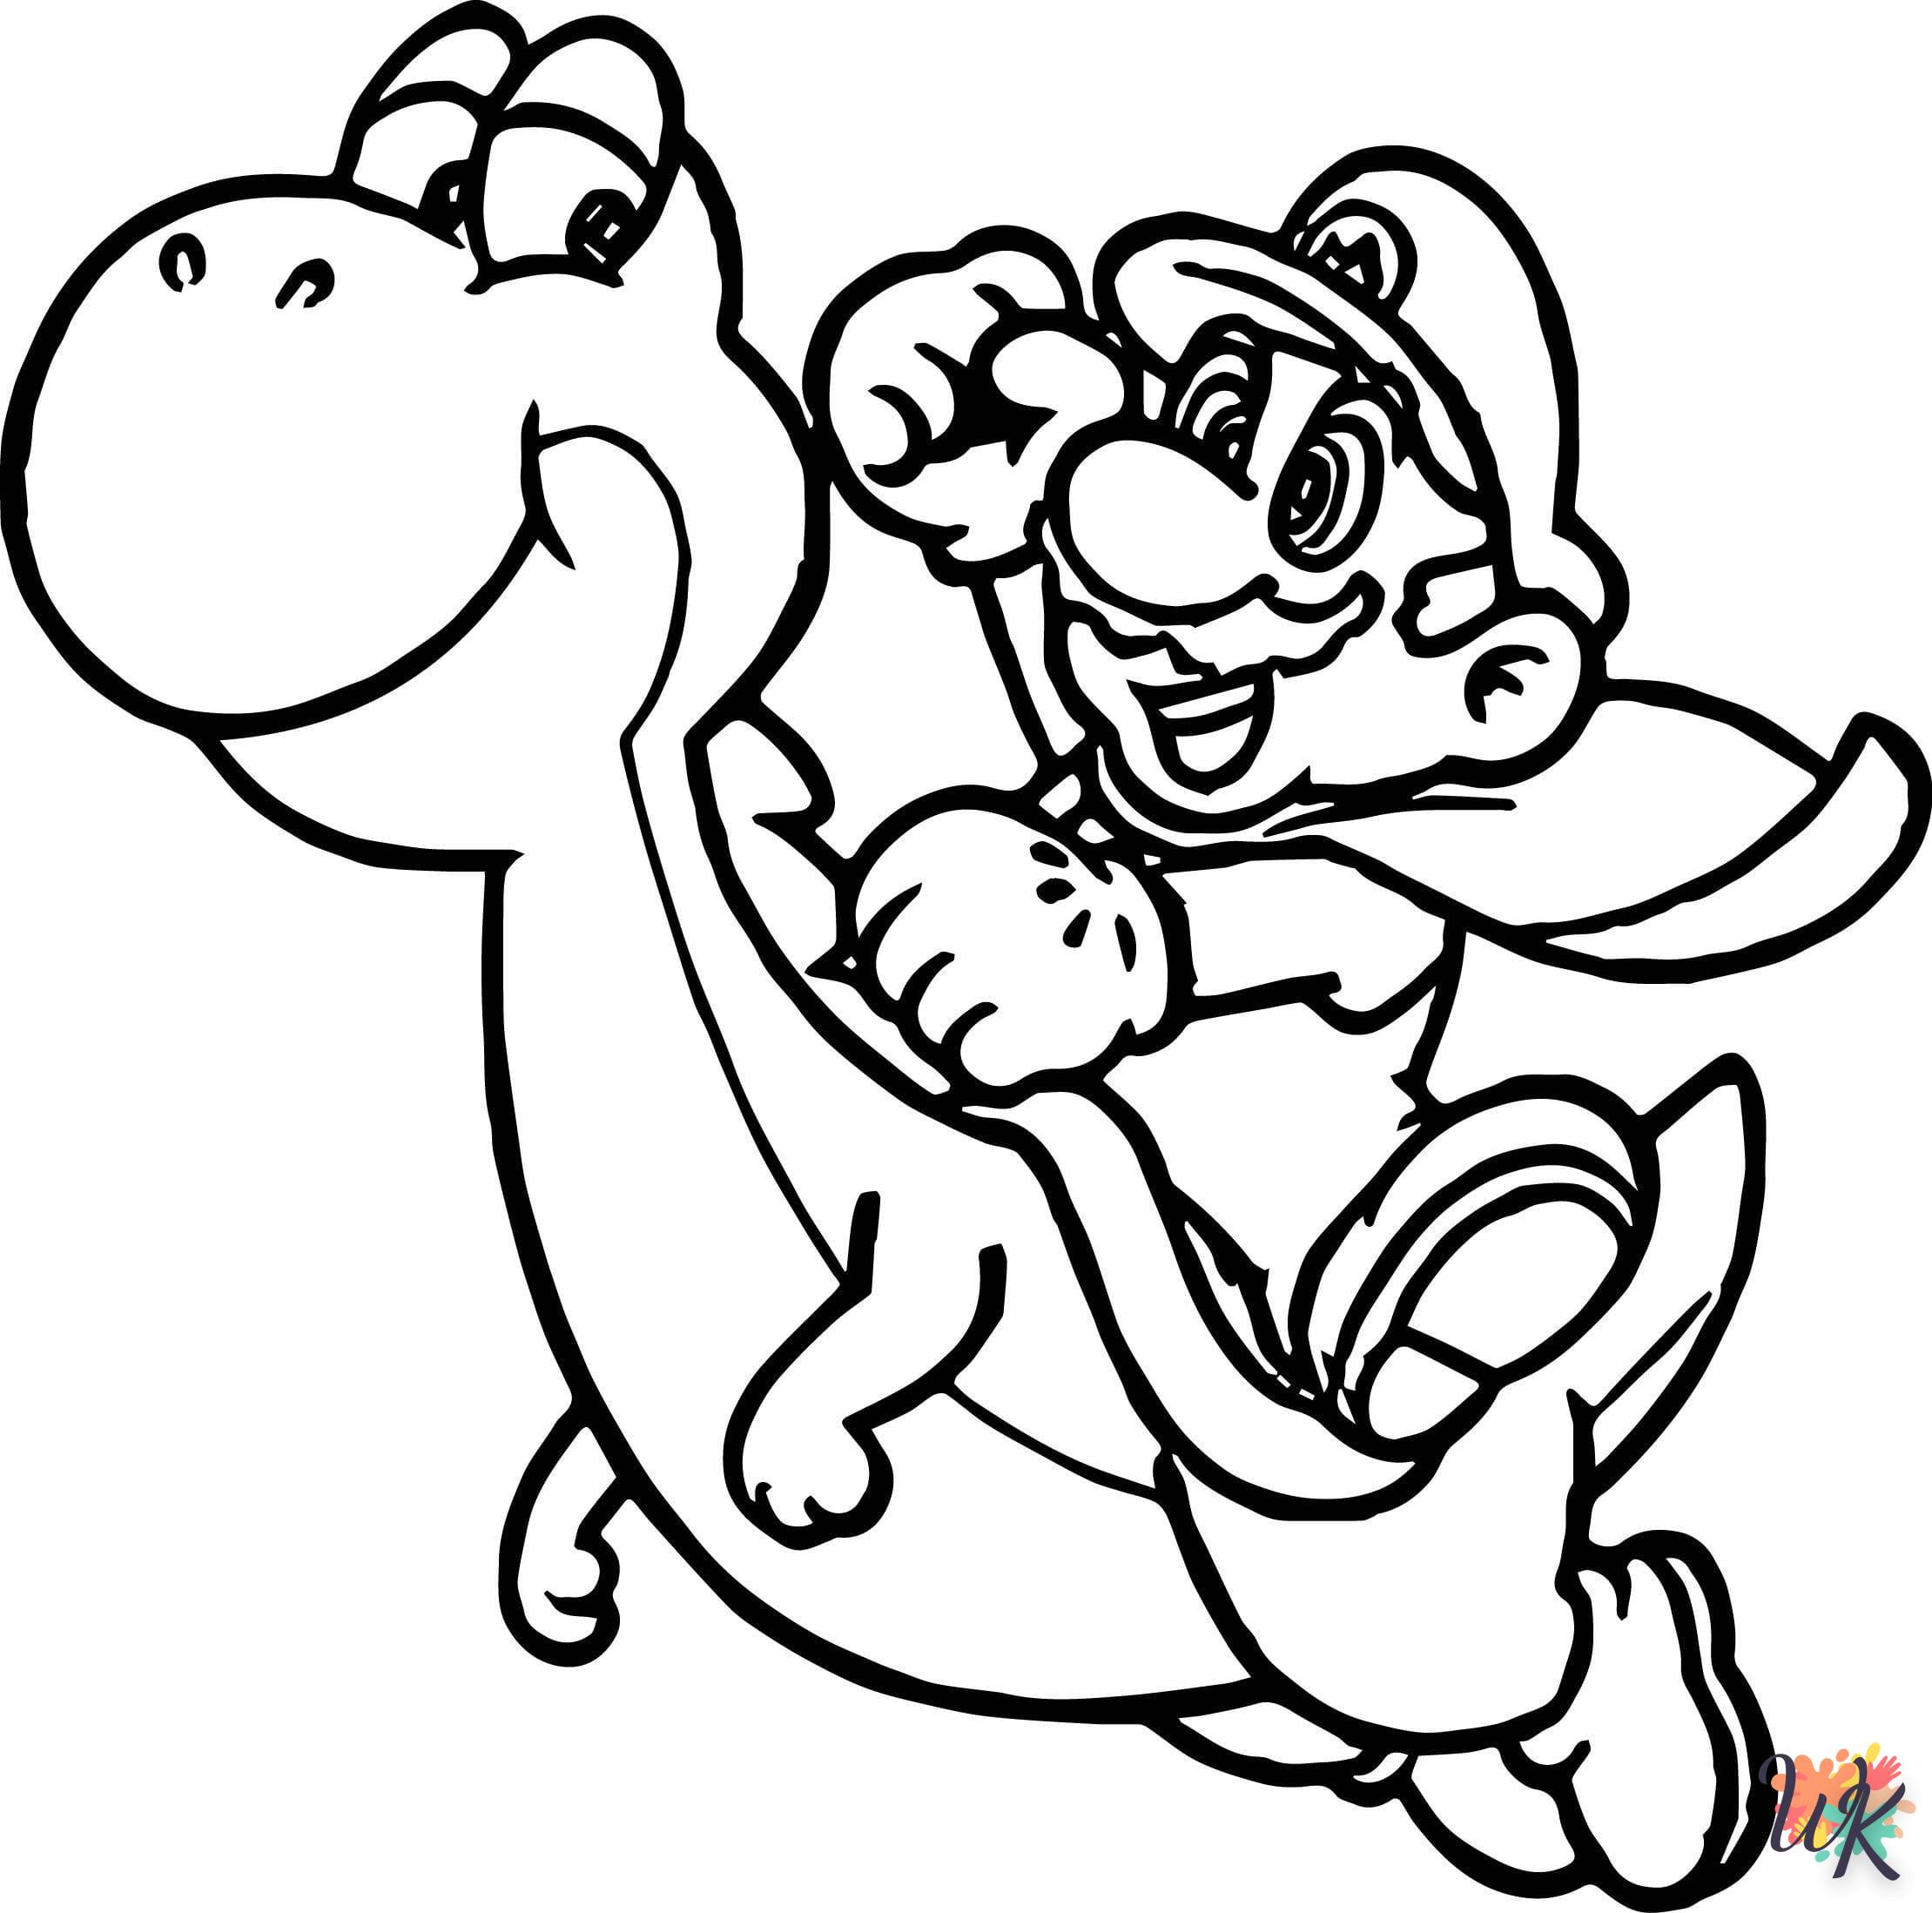 Yoshi coloring page to print for children aged 10